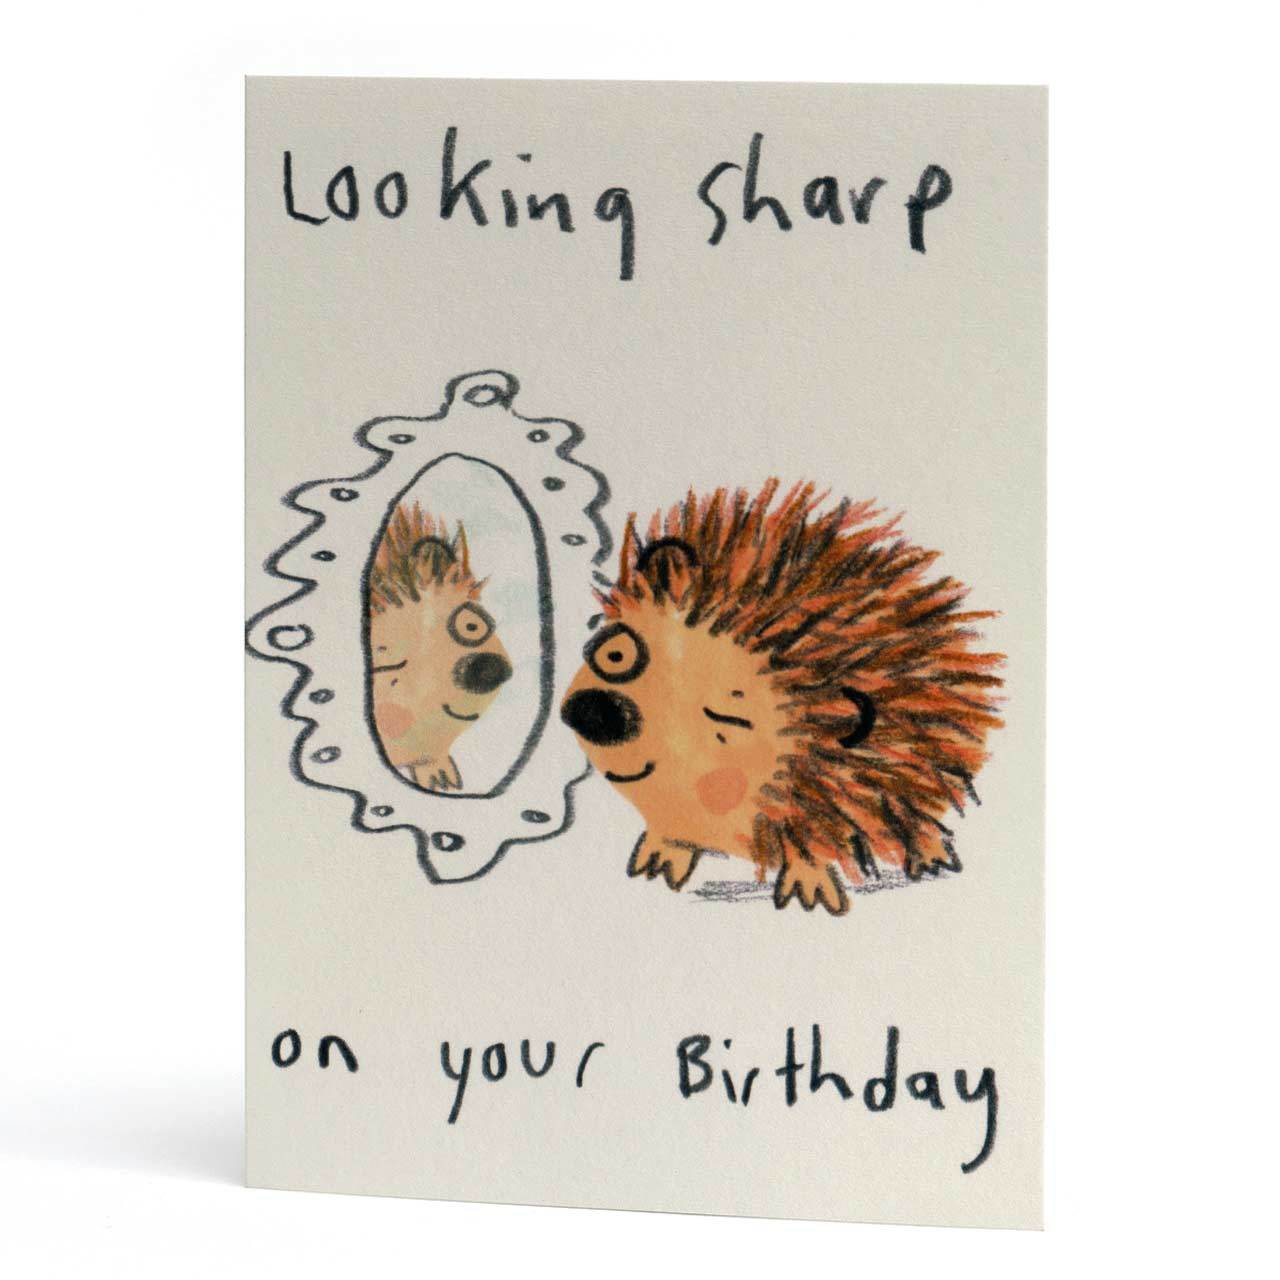 Looking Sharp on Your Birthday Greeting Card